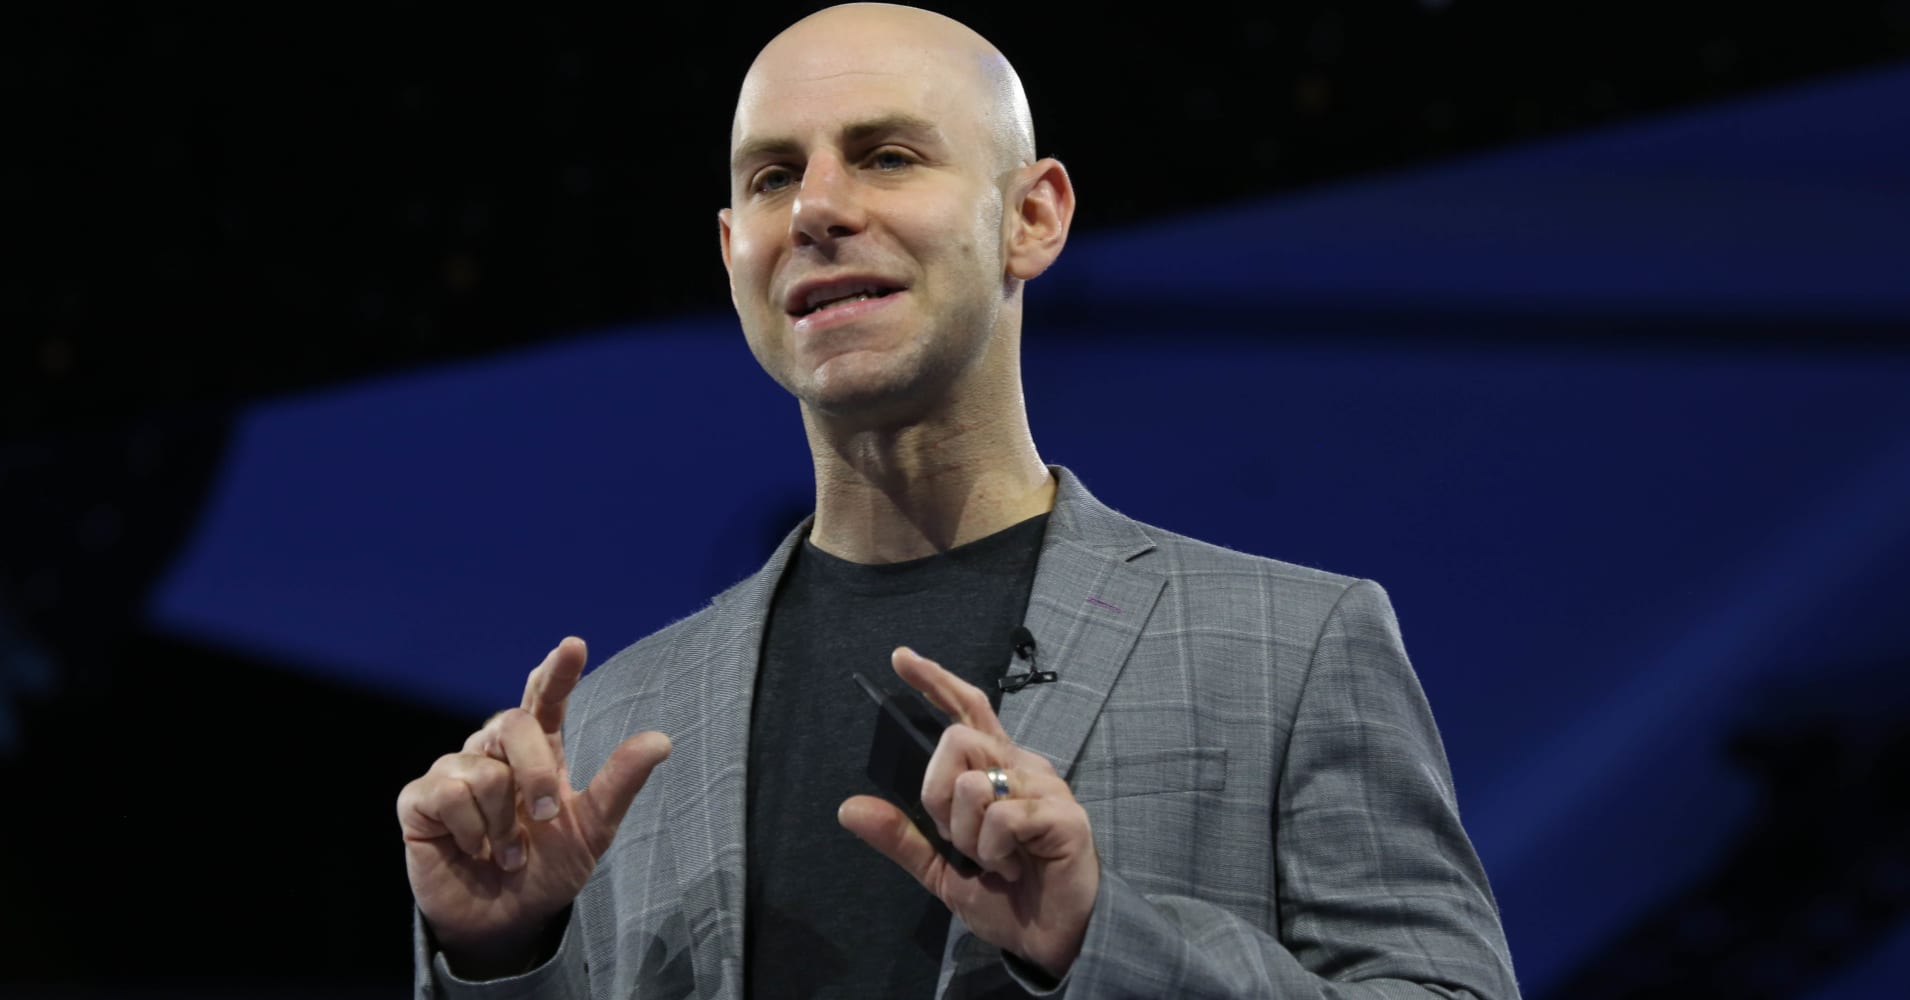 wharton psychologist adam grant: 'hustling' and taking care of yourself aren't mutually exclusive—here's why